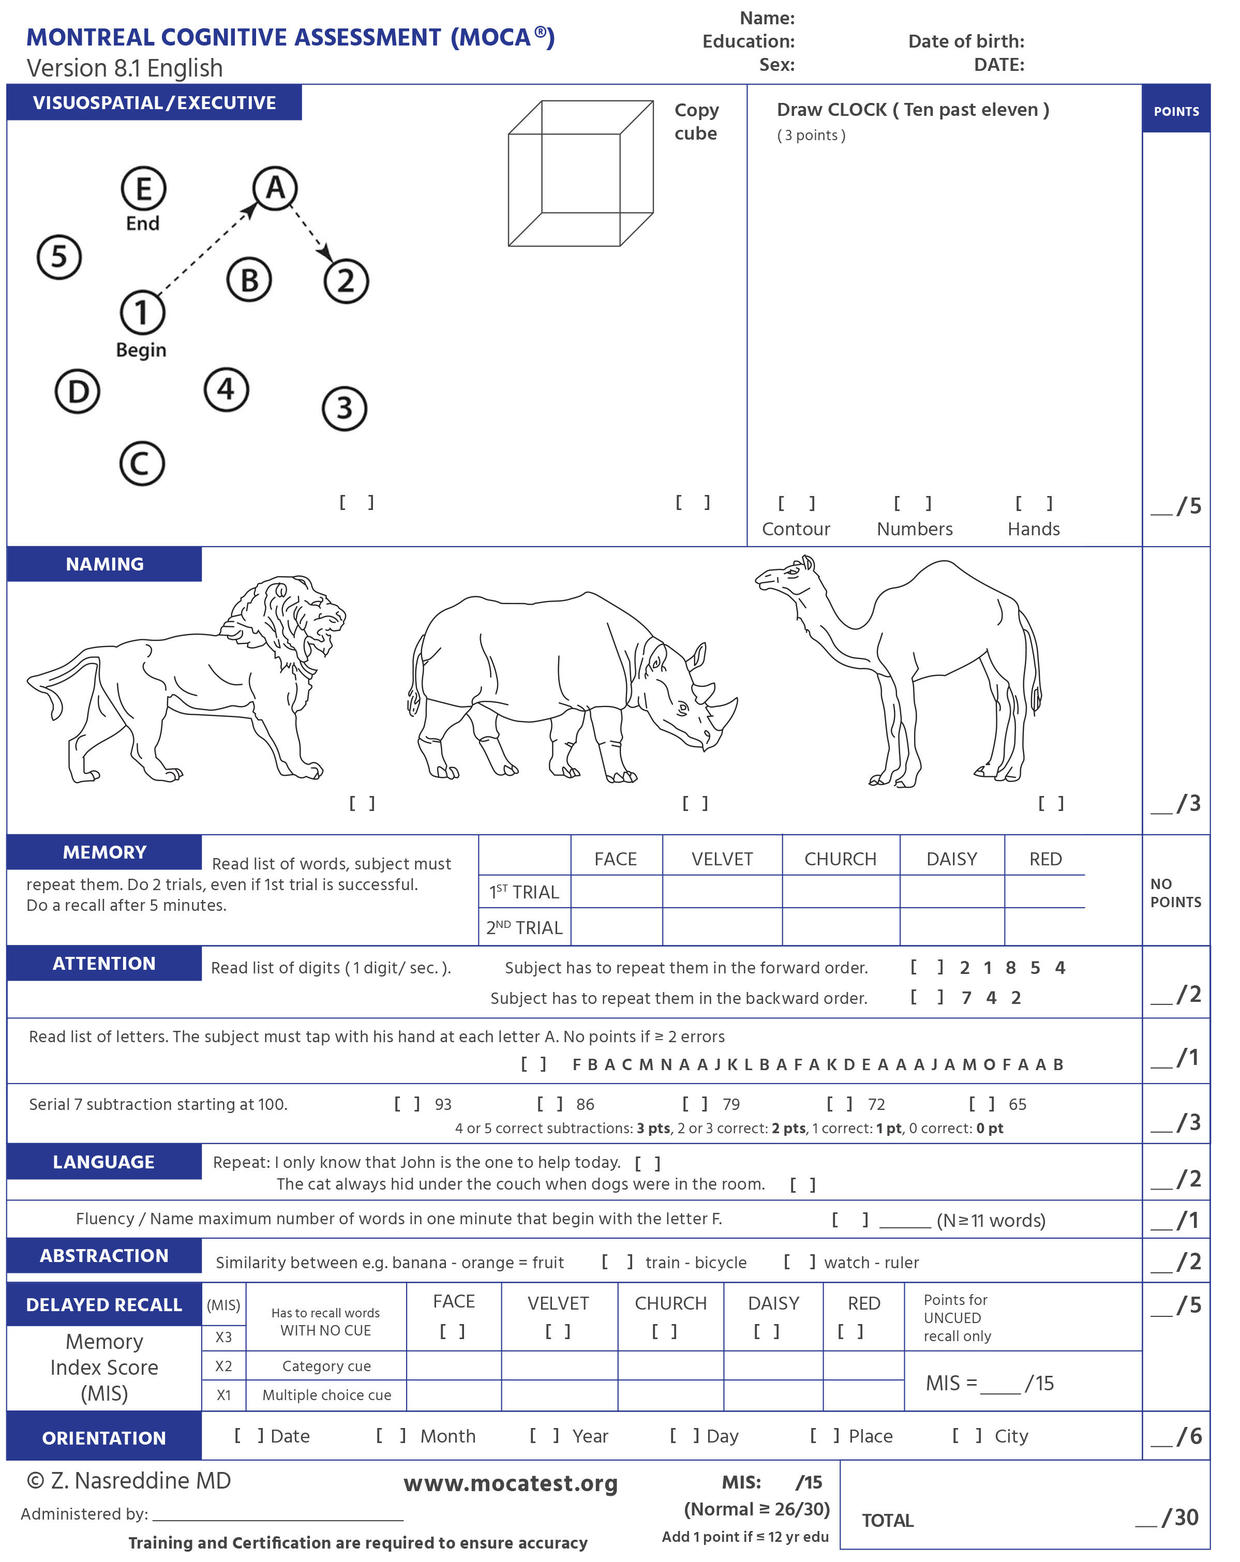 montreal cognitive assessment moca correct answers